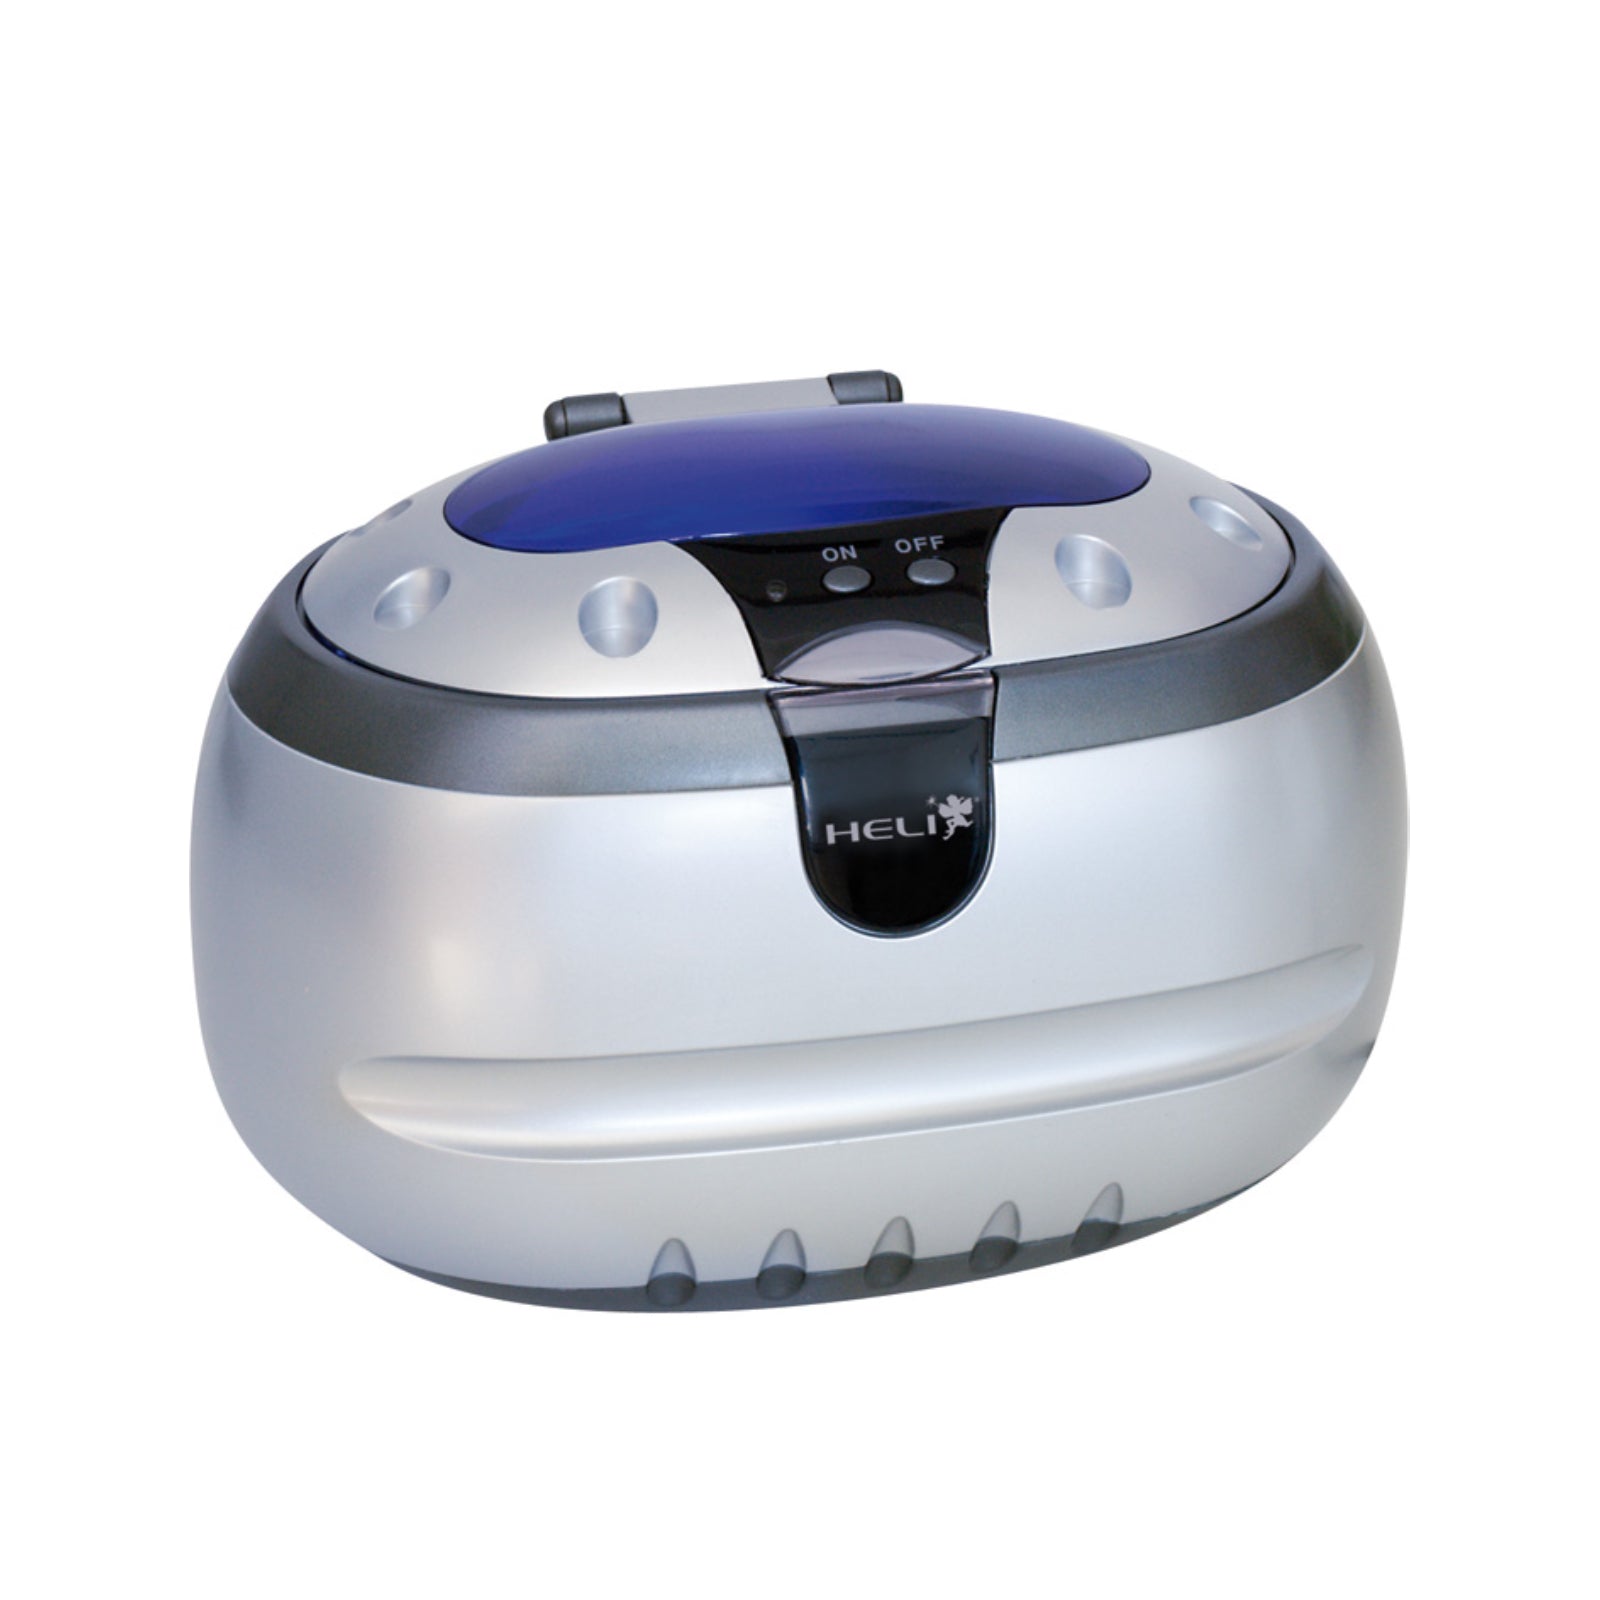 Hagerty Ultrasonic Jewelry Cleaner 2 Liter